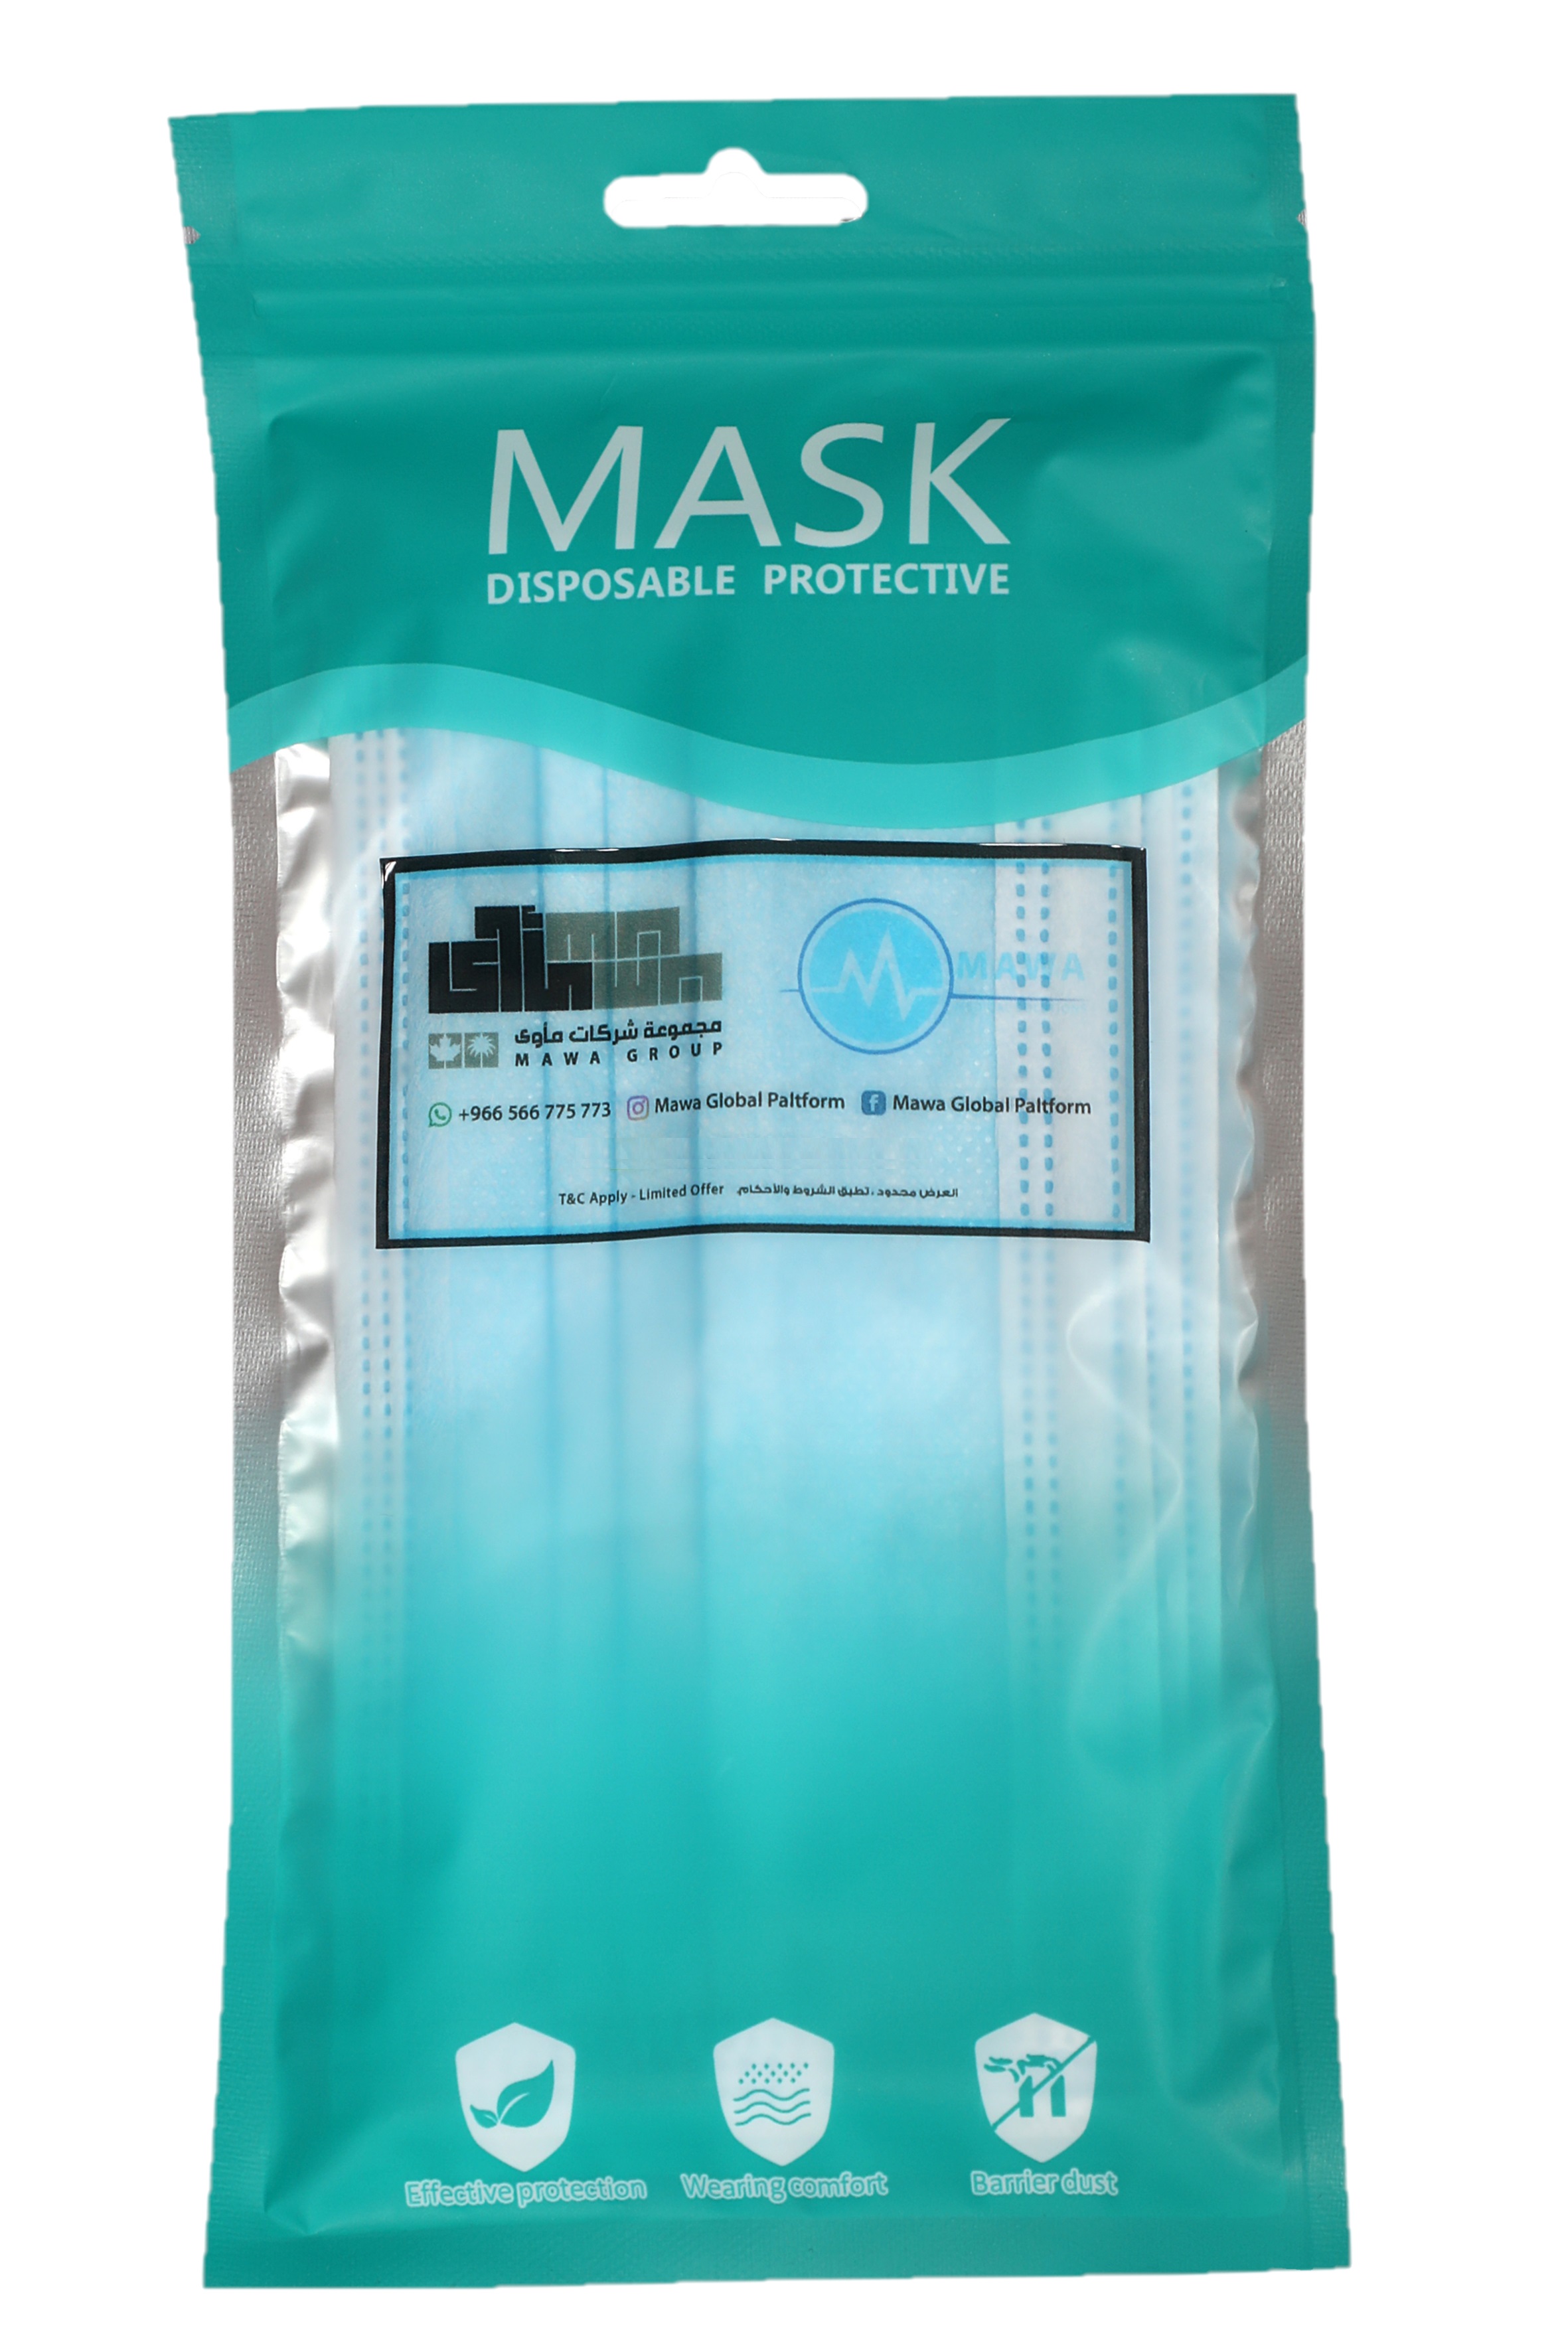 One pack of 5 disposable, 3-layers masks